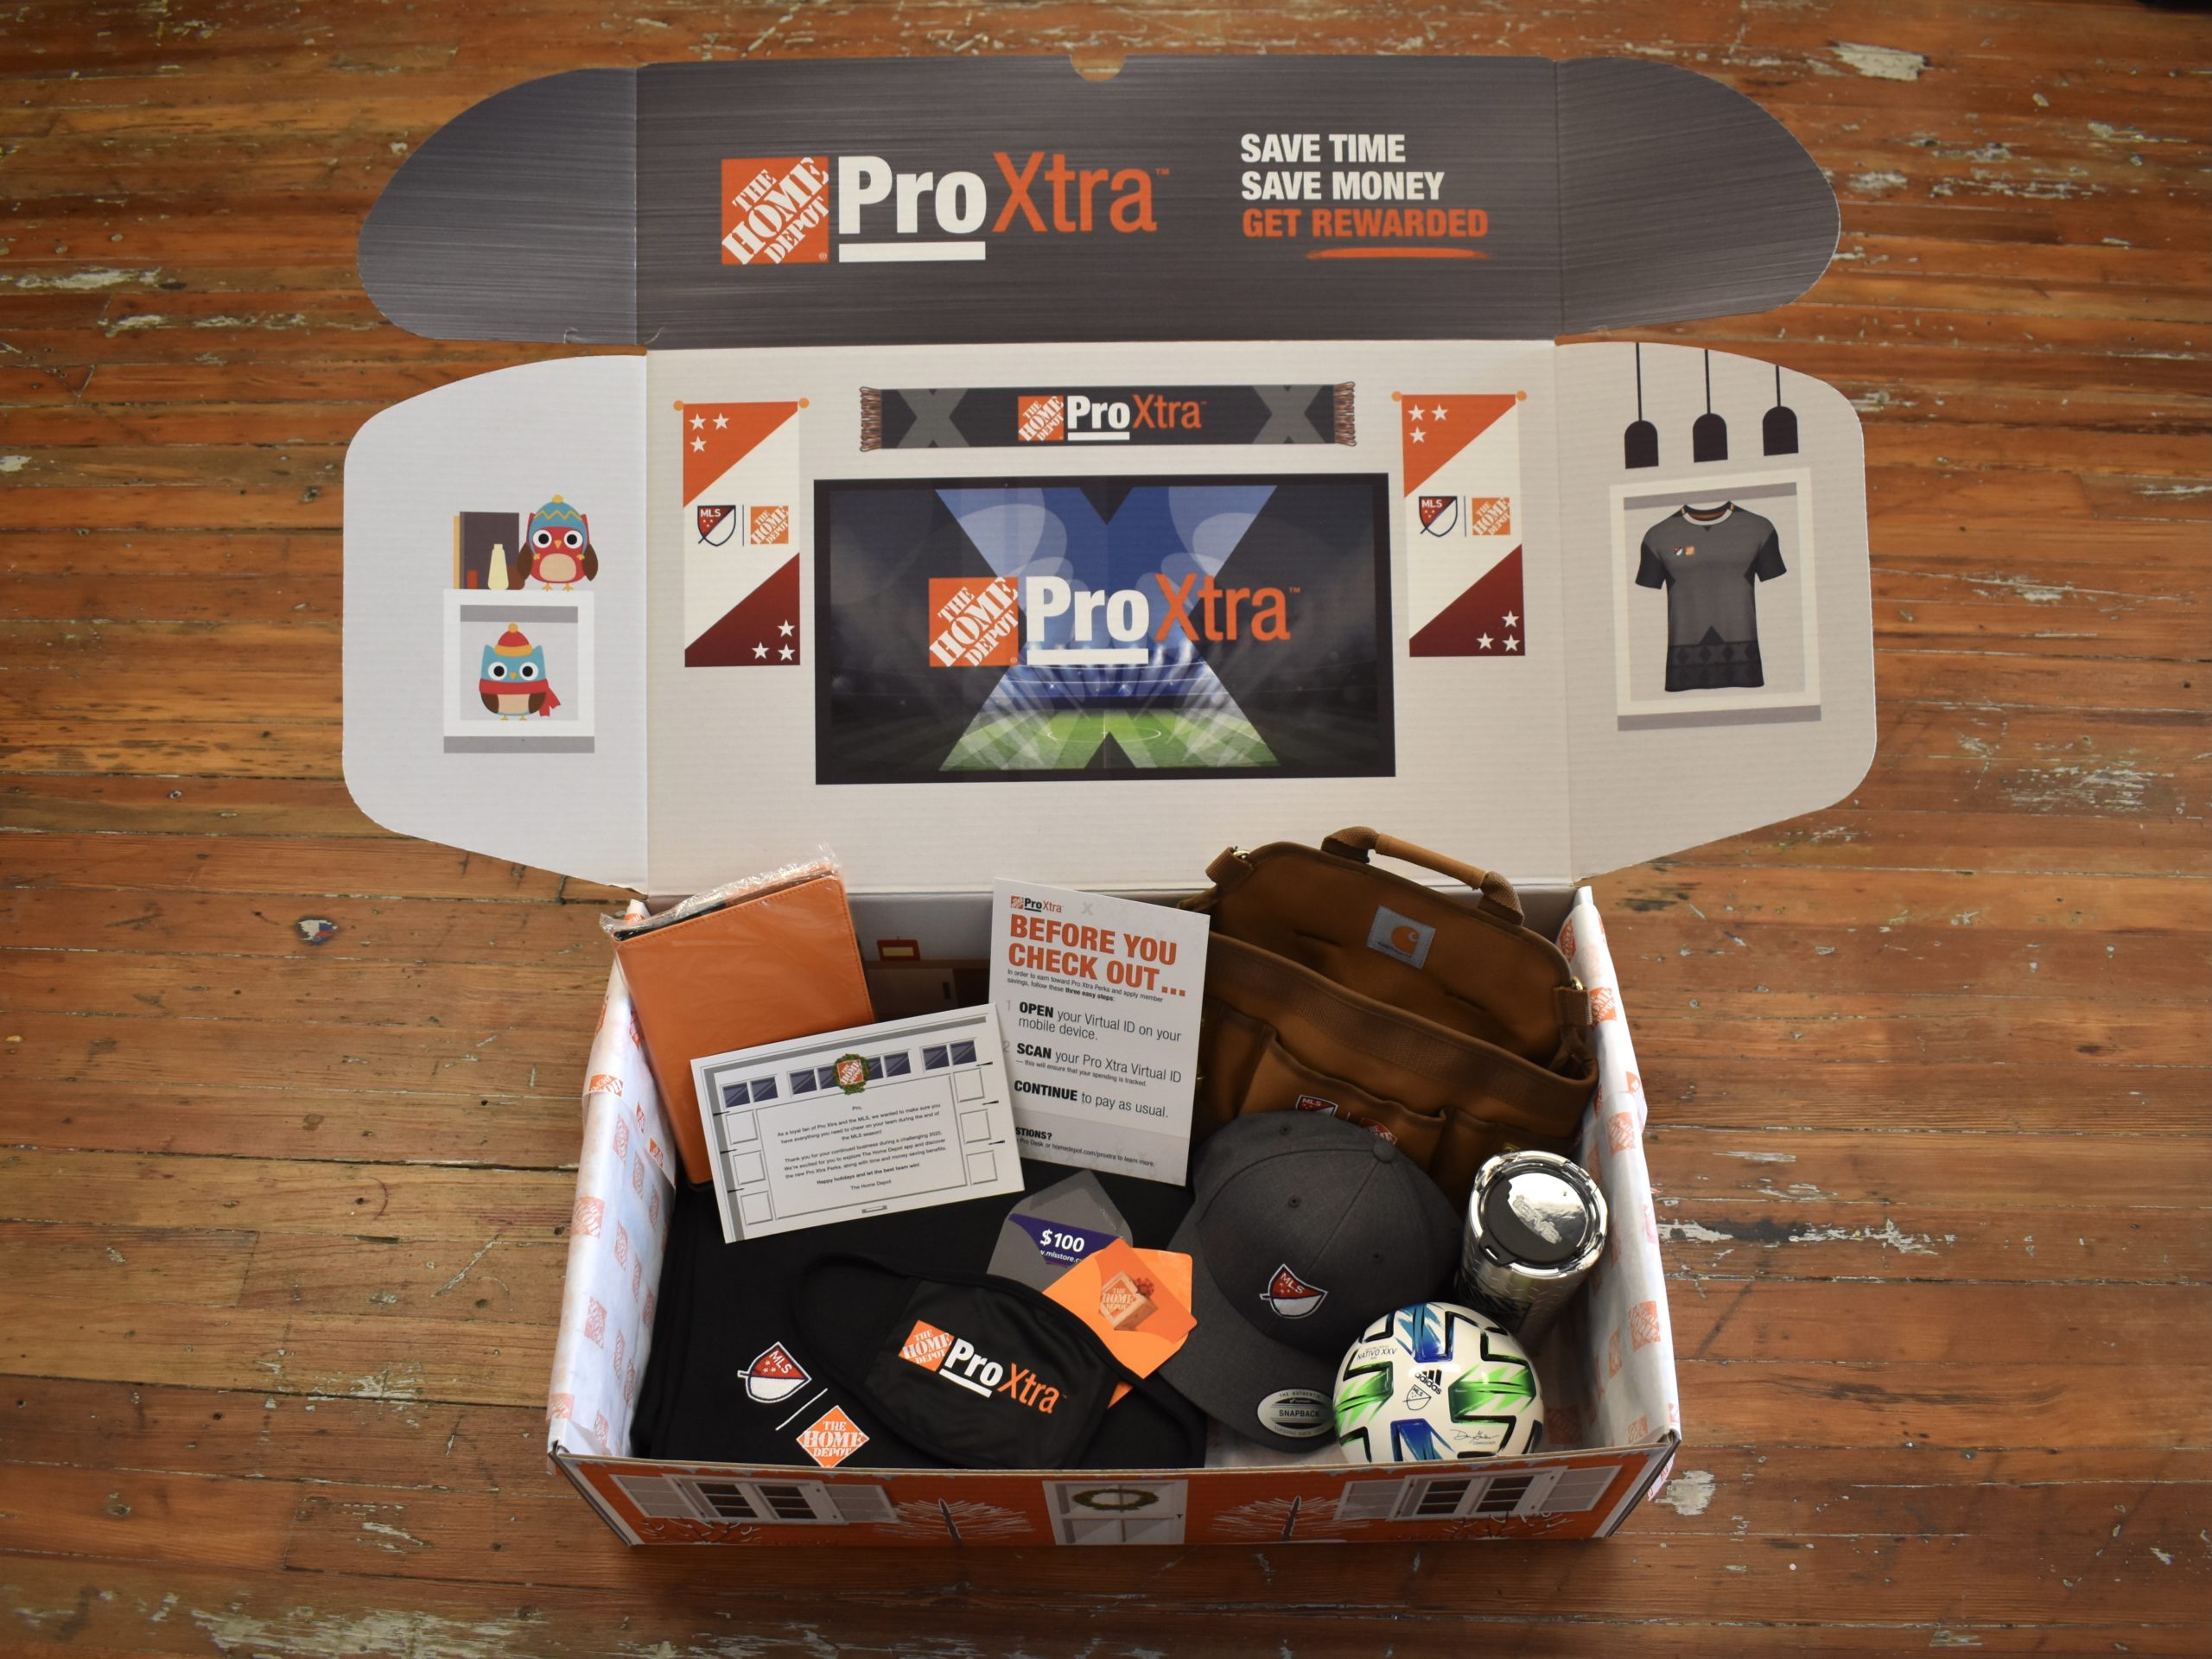 Influencer box and promotional items for The Home Depot.